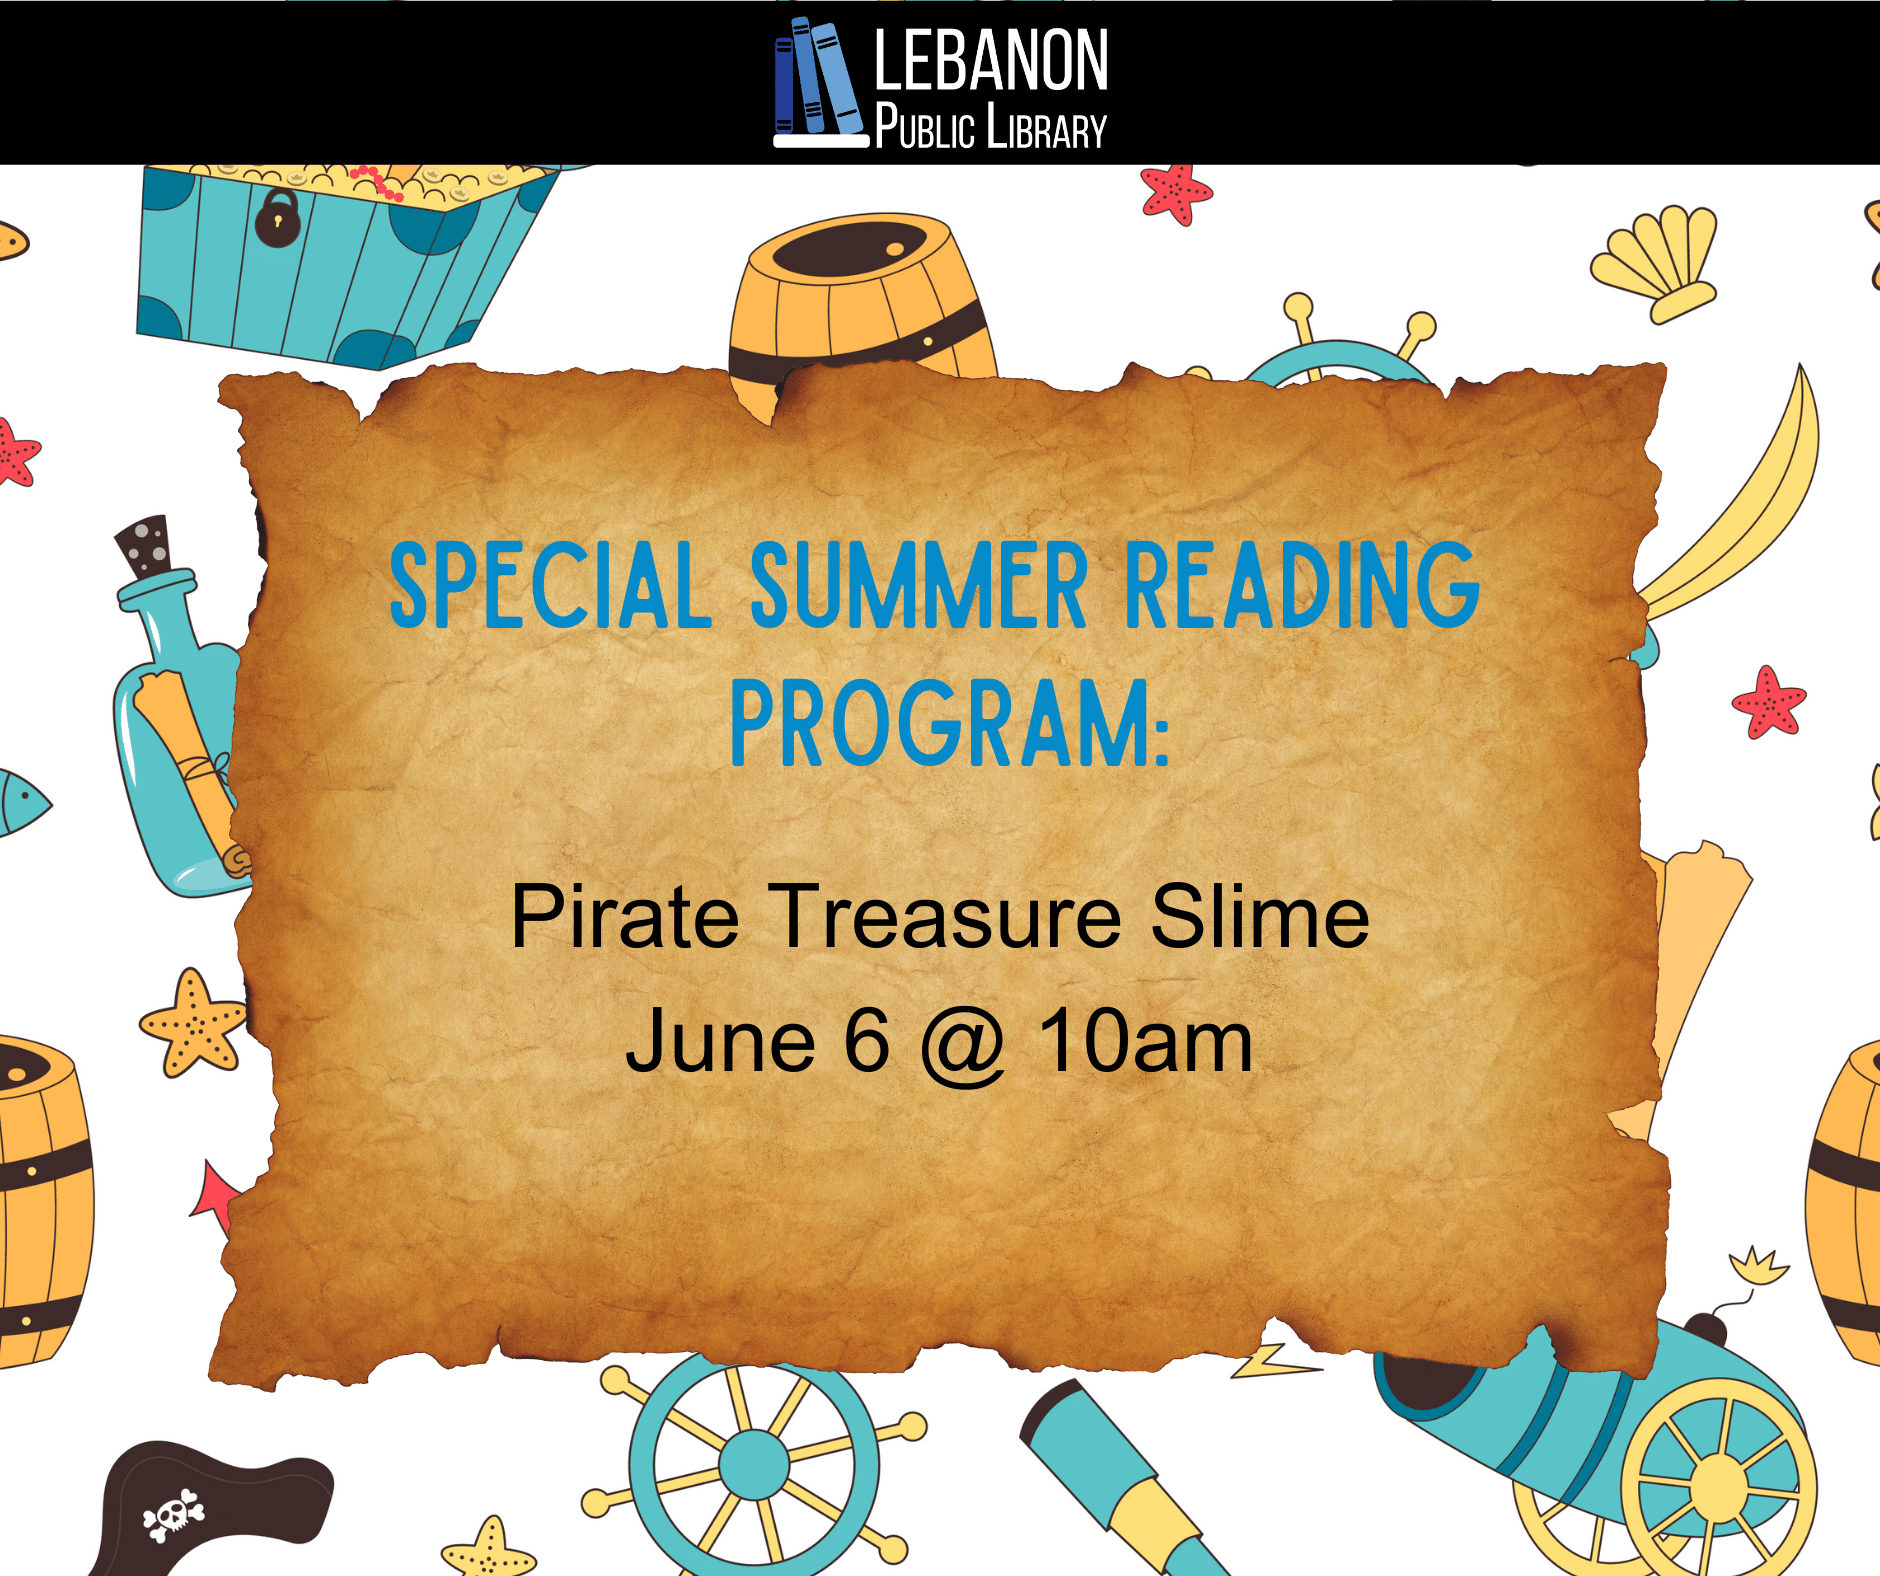 Special Summer Reading Program: Pirate Treasure Slime, June 6th at 10:00am.